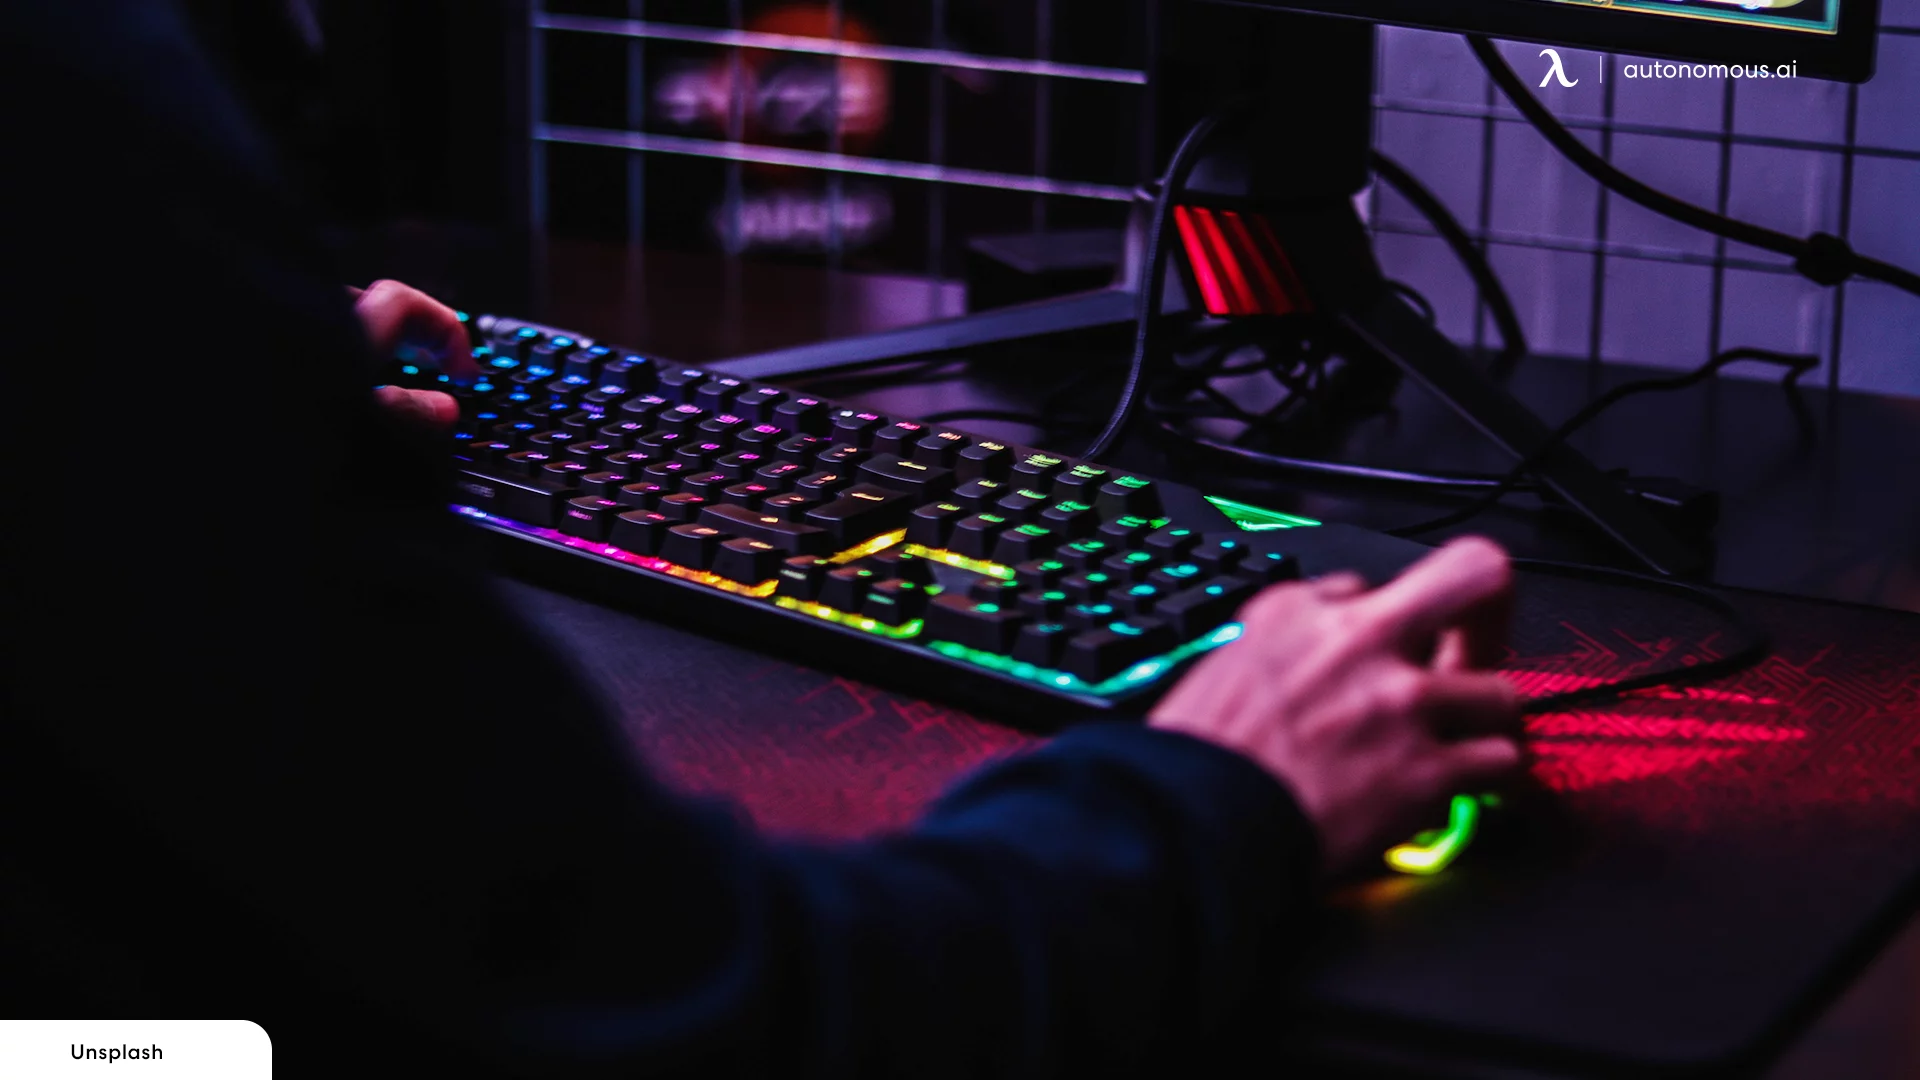 What Are the Benefits of an RGB Keyboard?